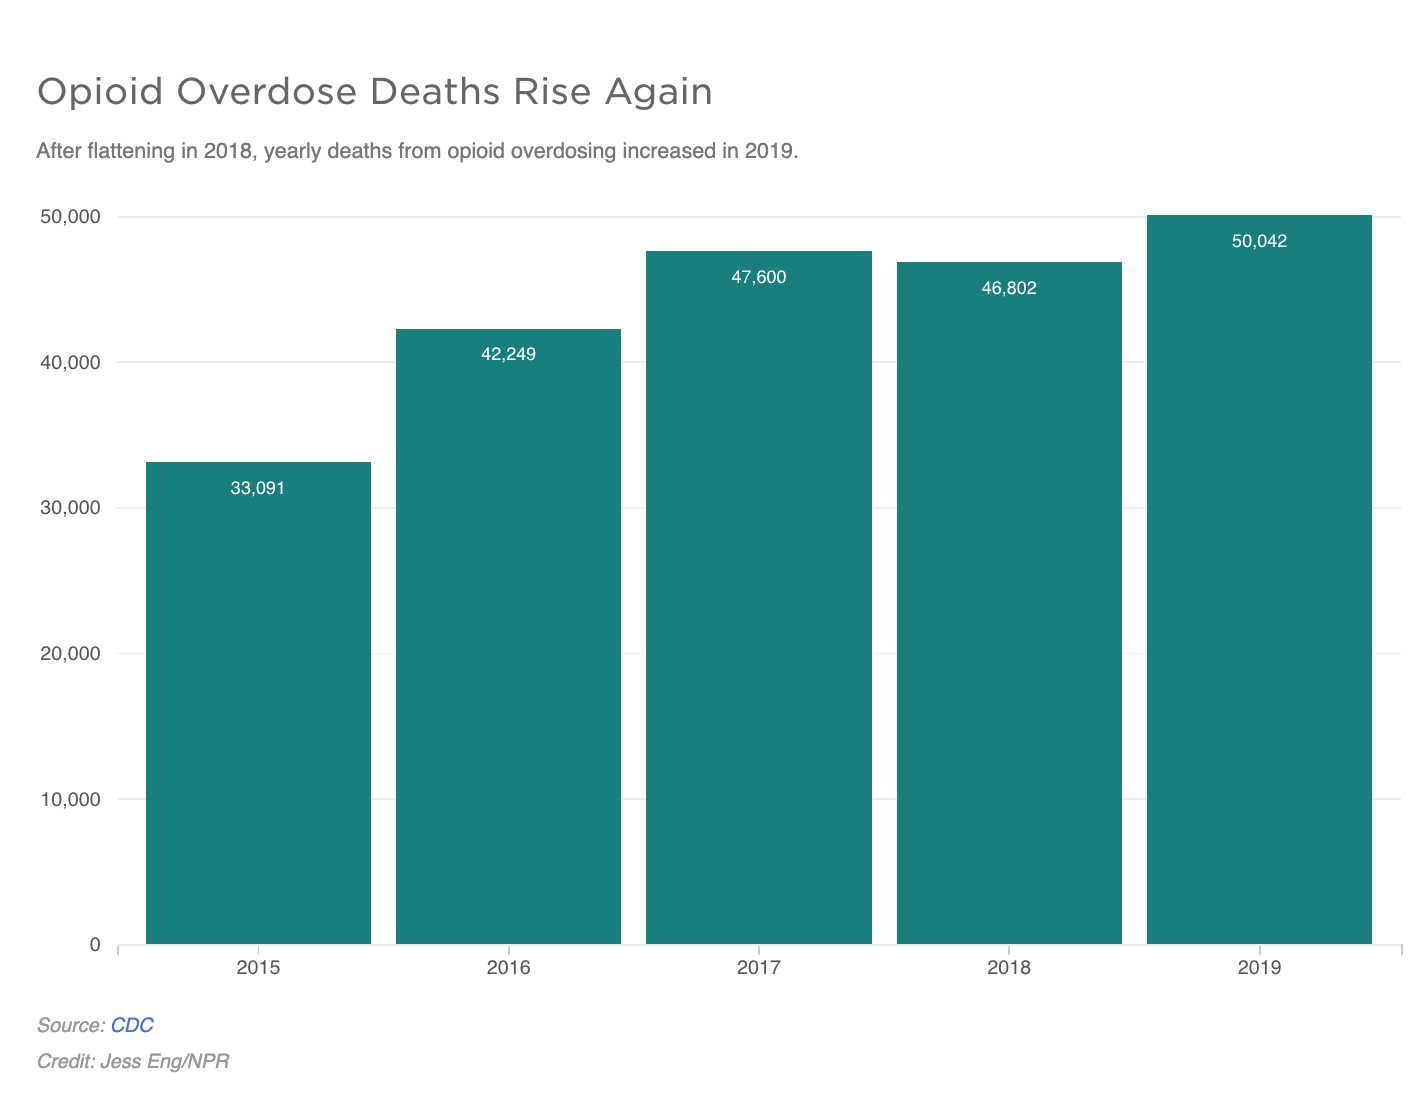 An illustration showing after flattening in 2018, yearly deaths from opioid overdosing increased in 2019.